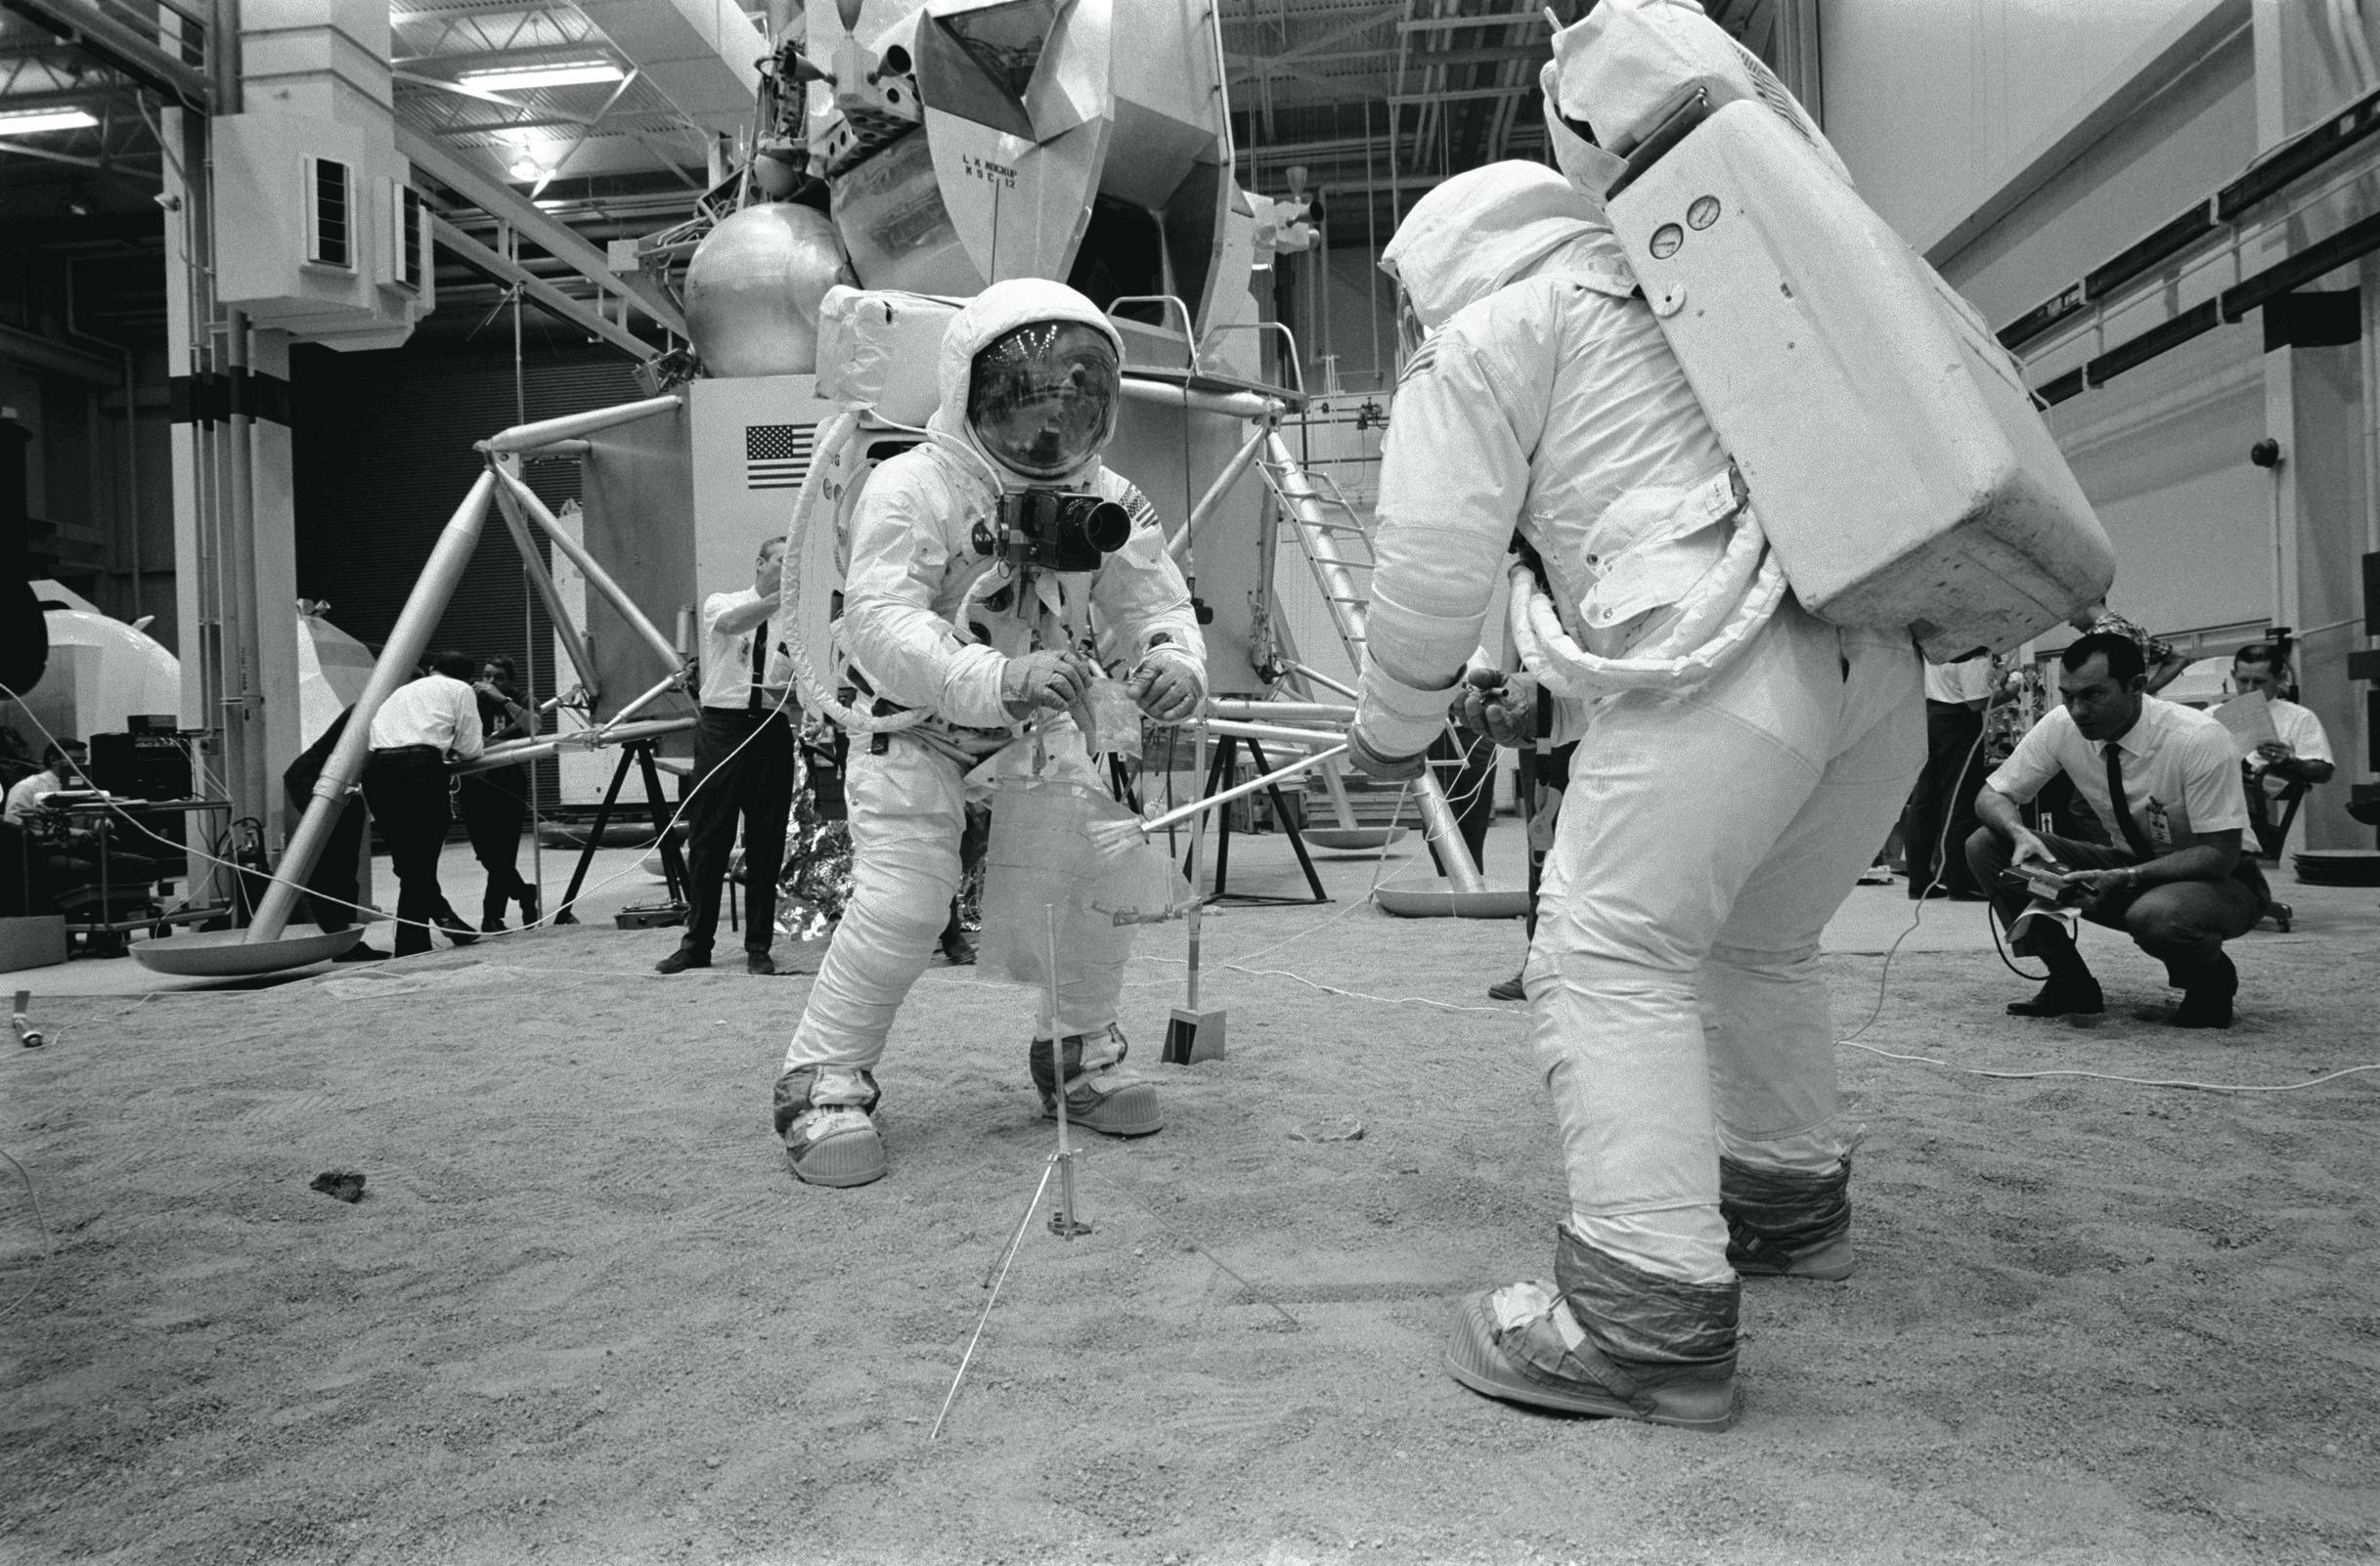 Armstrong and Aldrin practice taking lunar samples. 